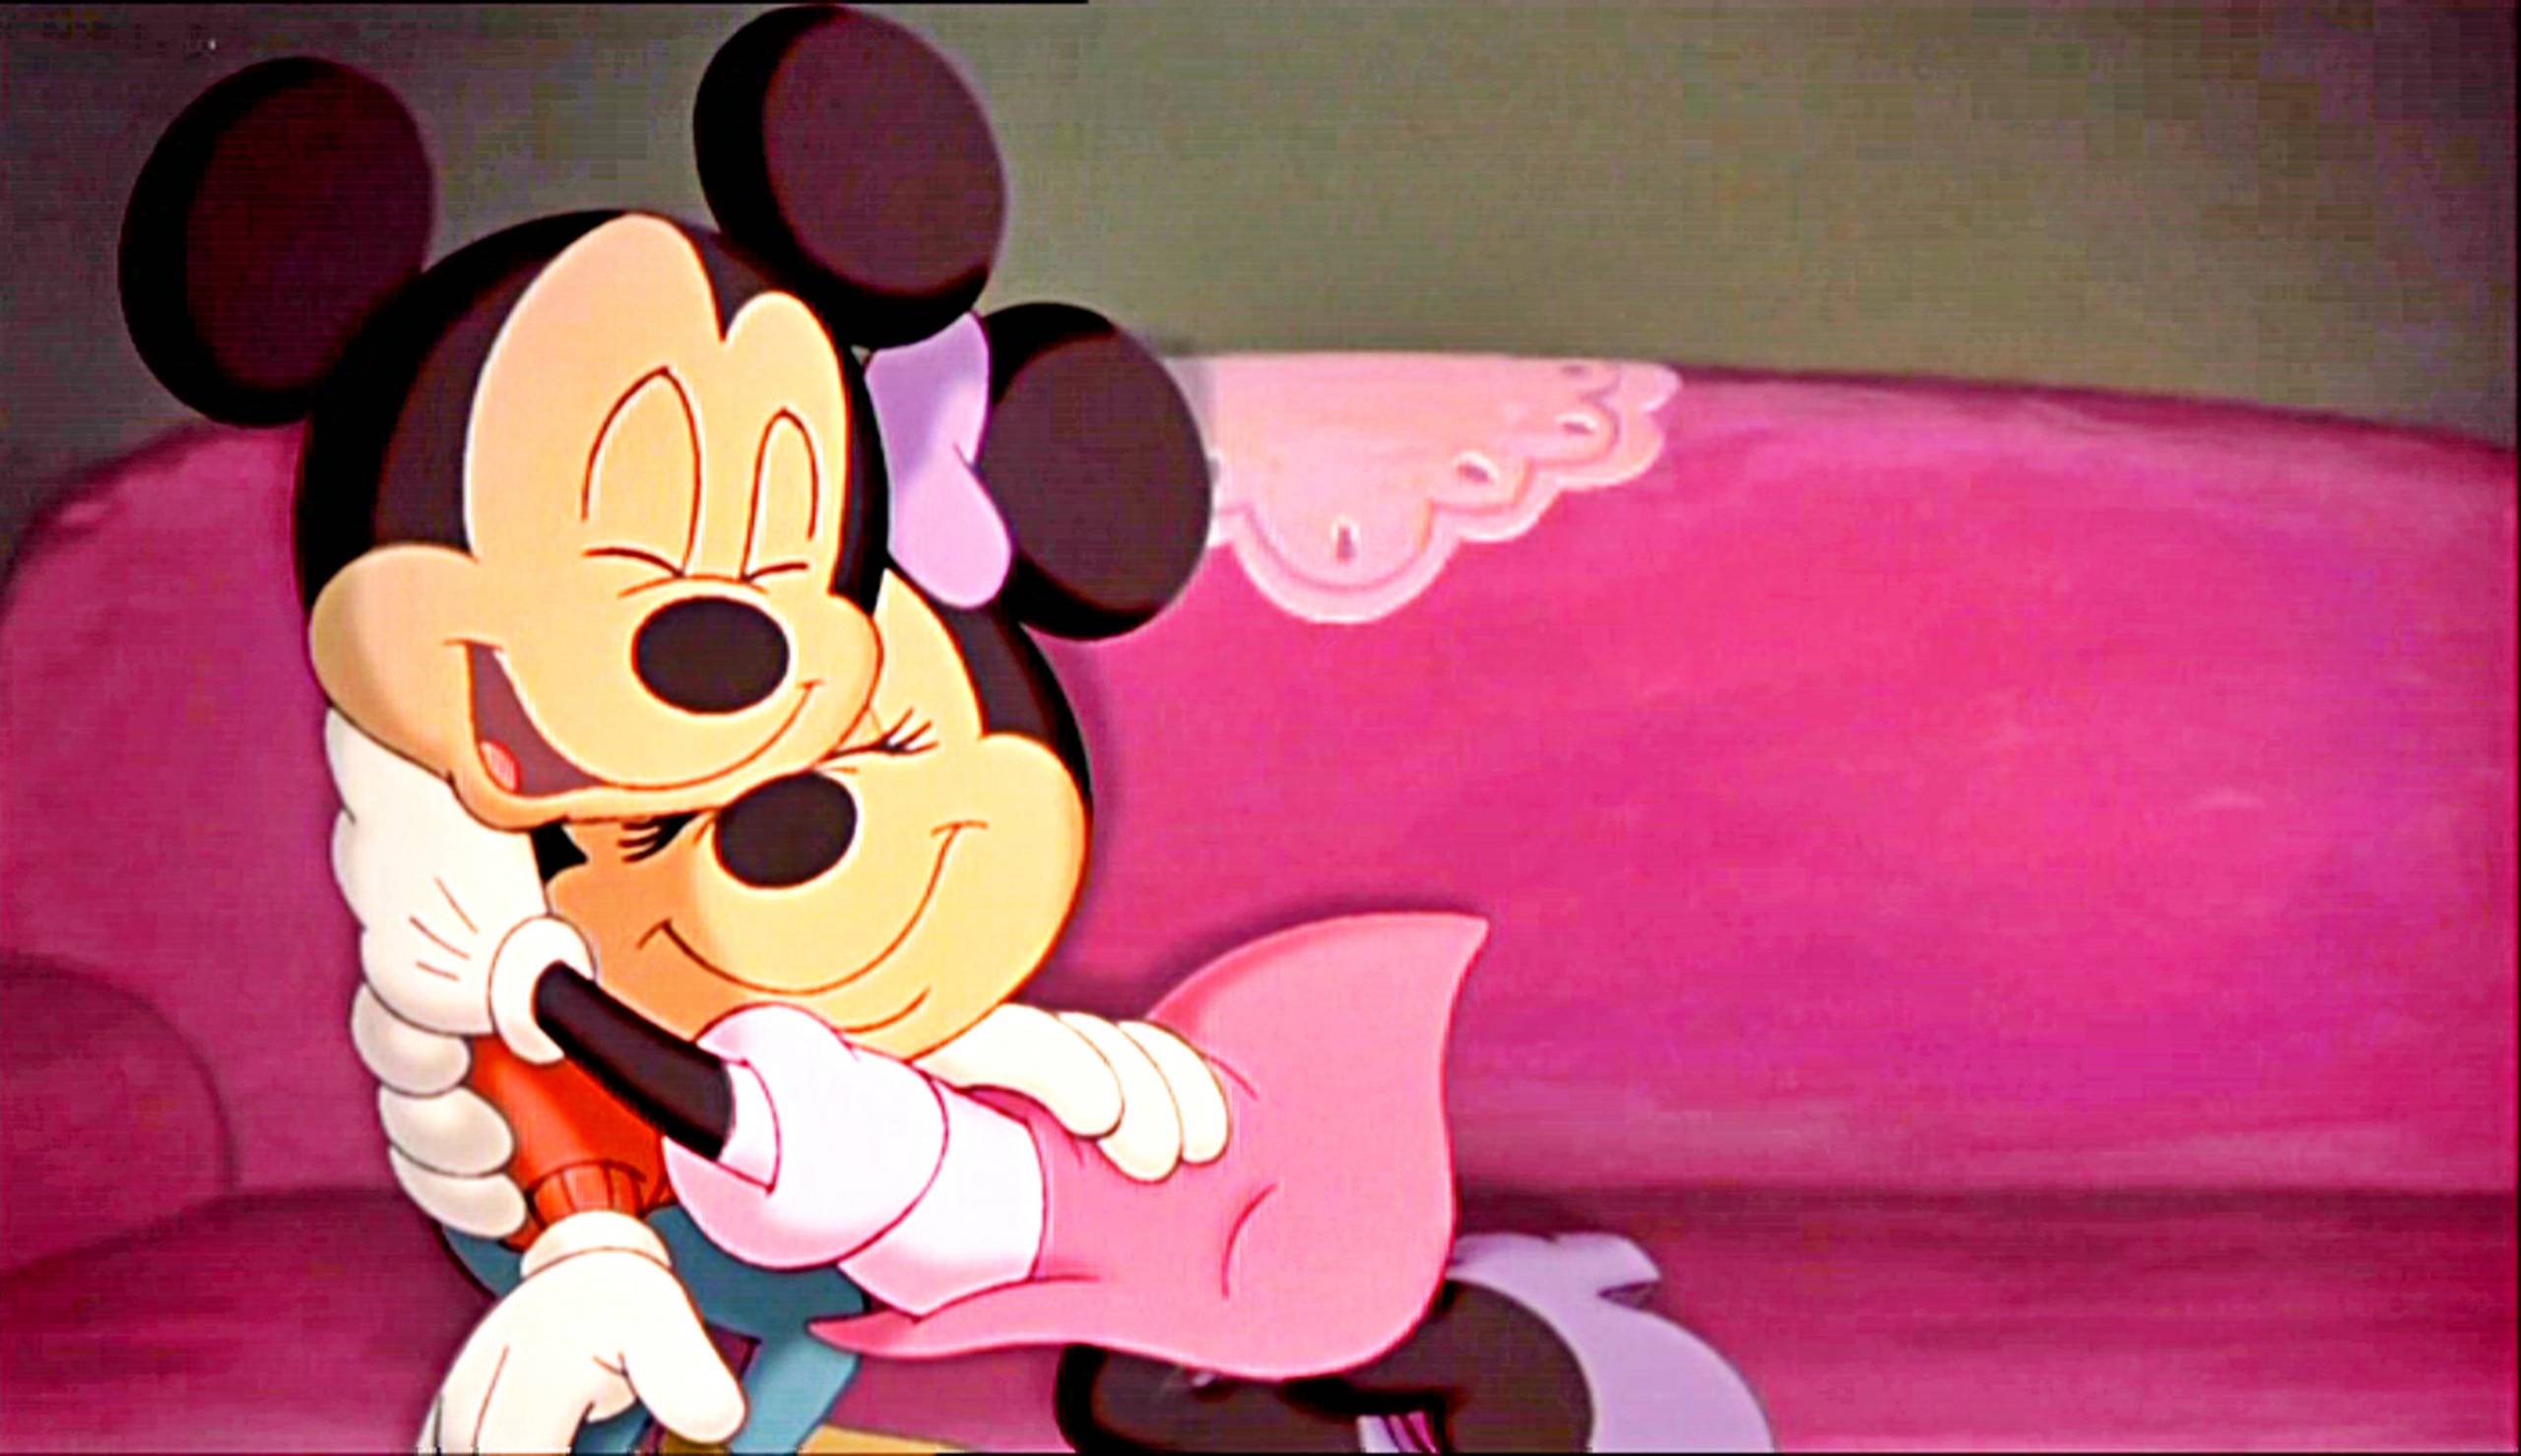 Download Wallpapers Lucu Minnie Mouse